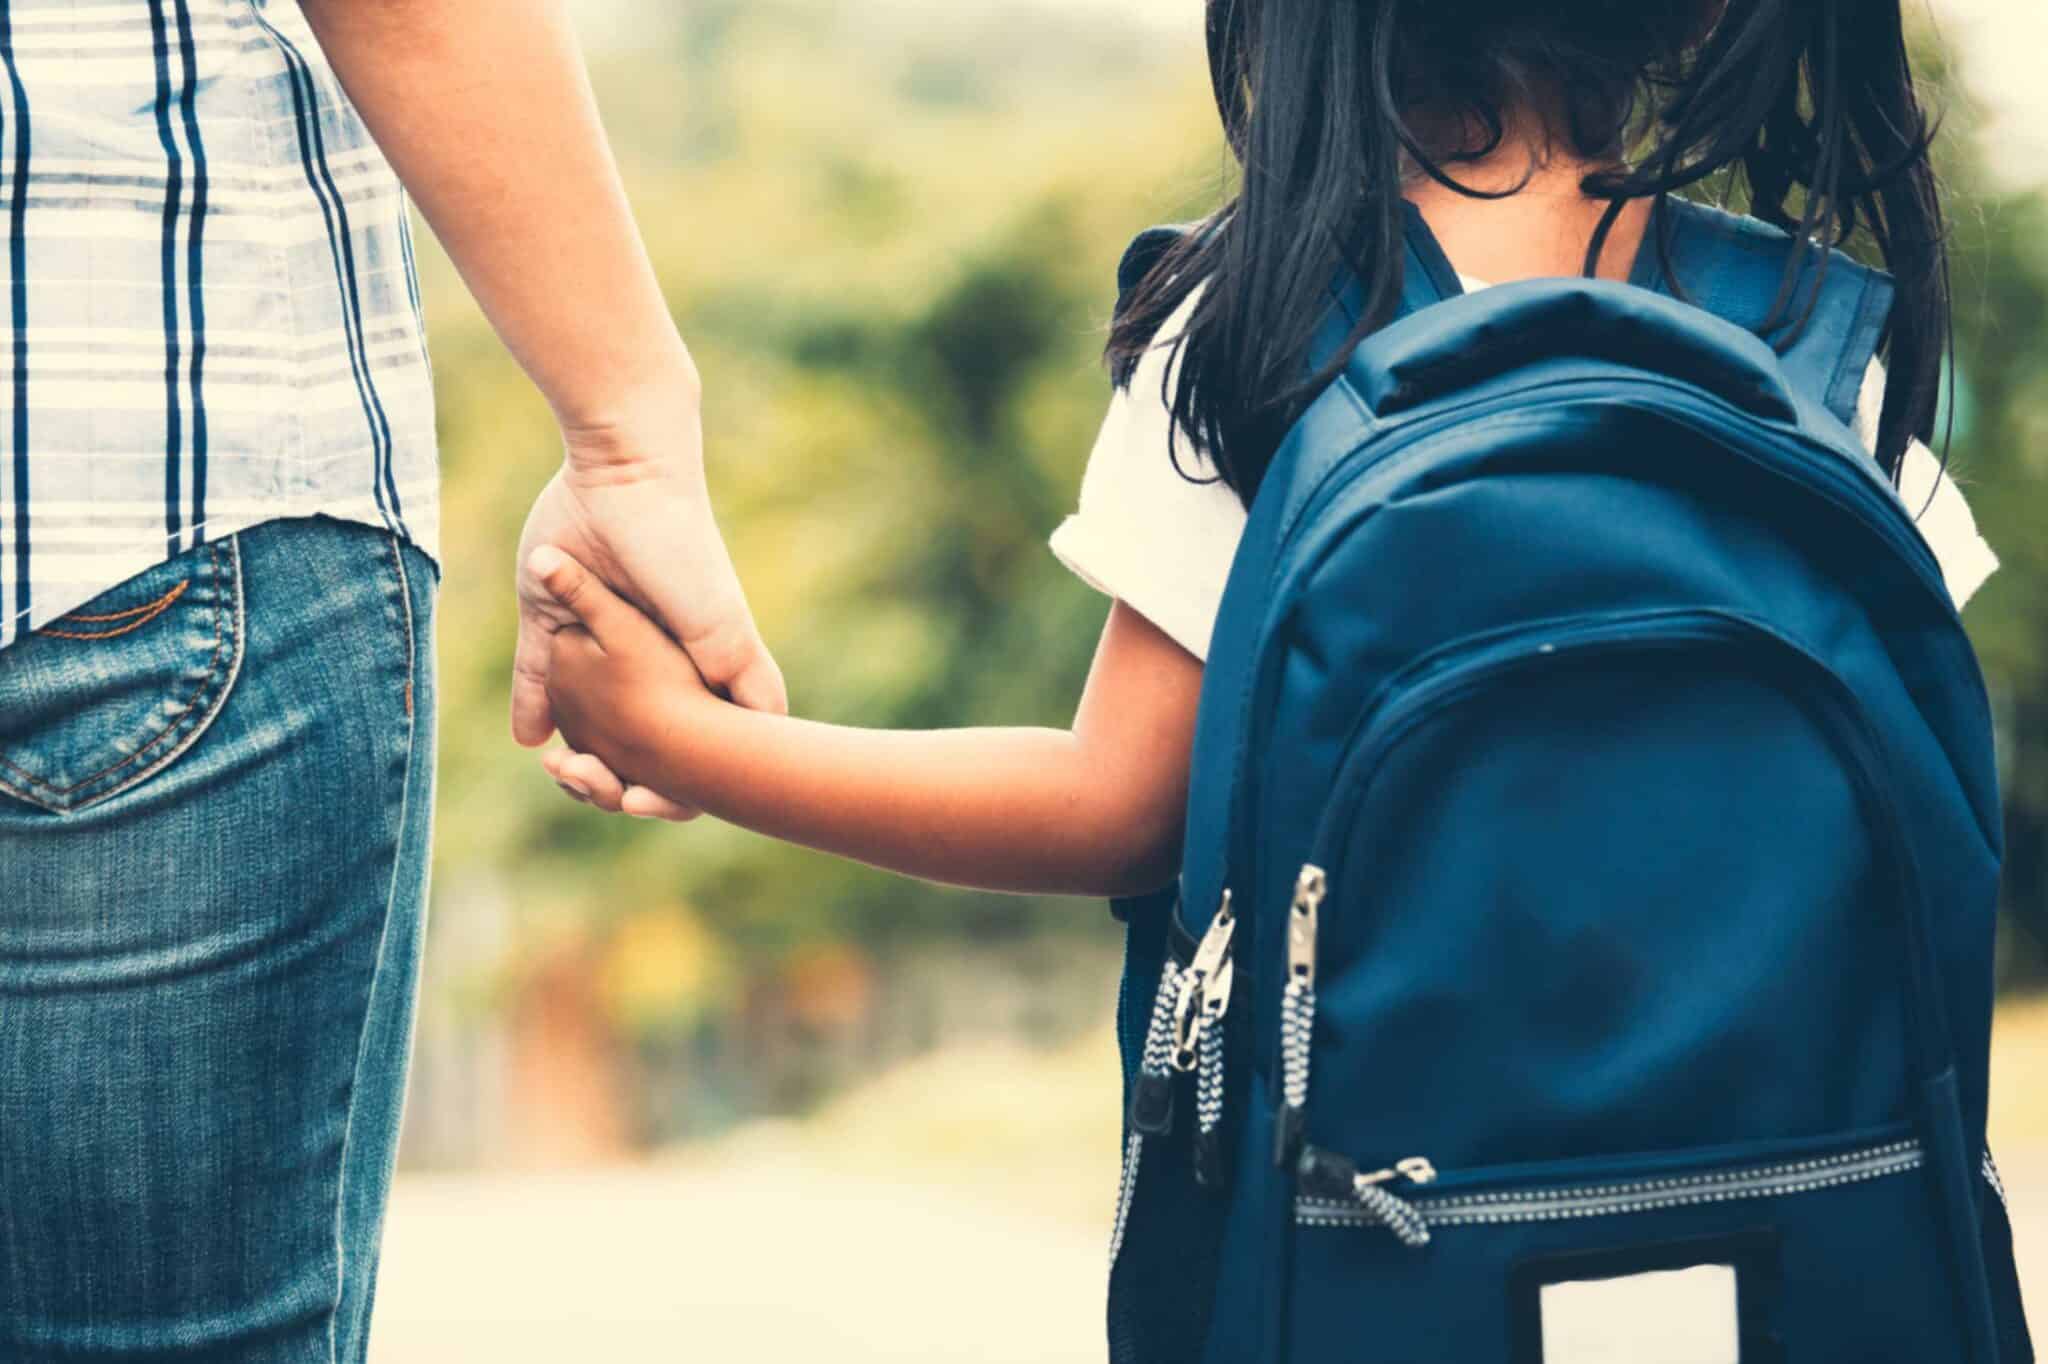 Parenting advice: My daughter has an extremely disturbing classmate, and  the school won't do anything.